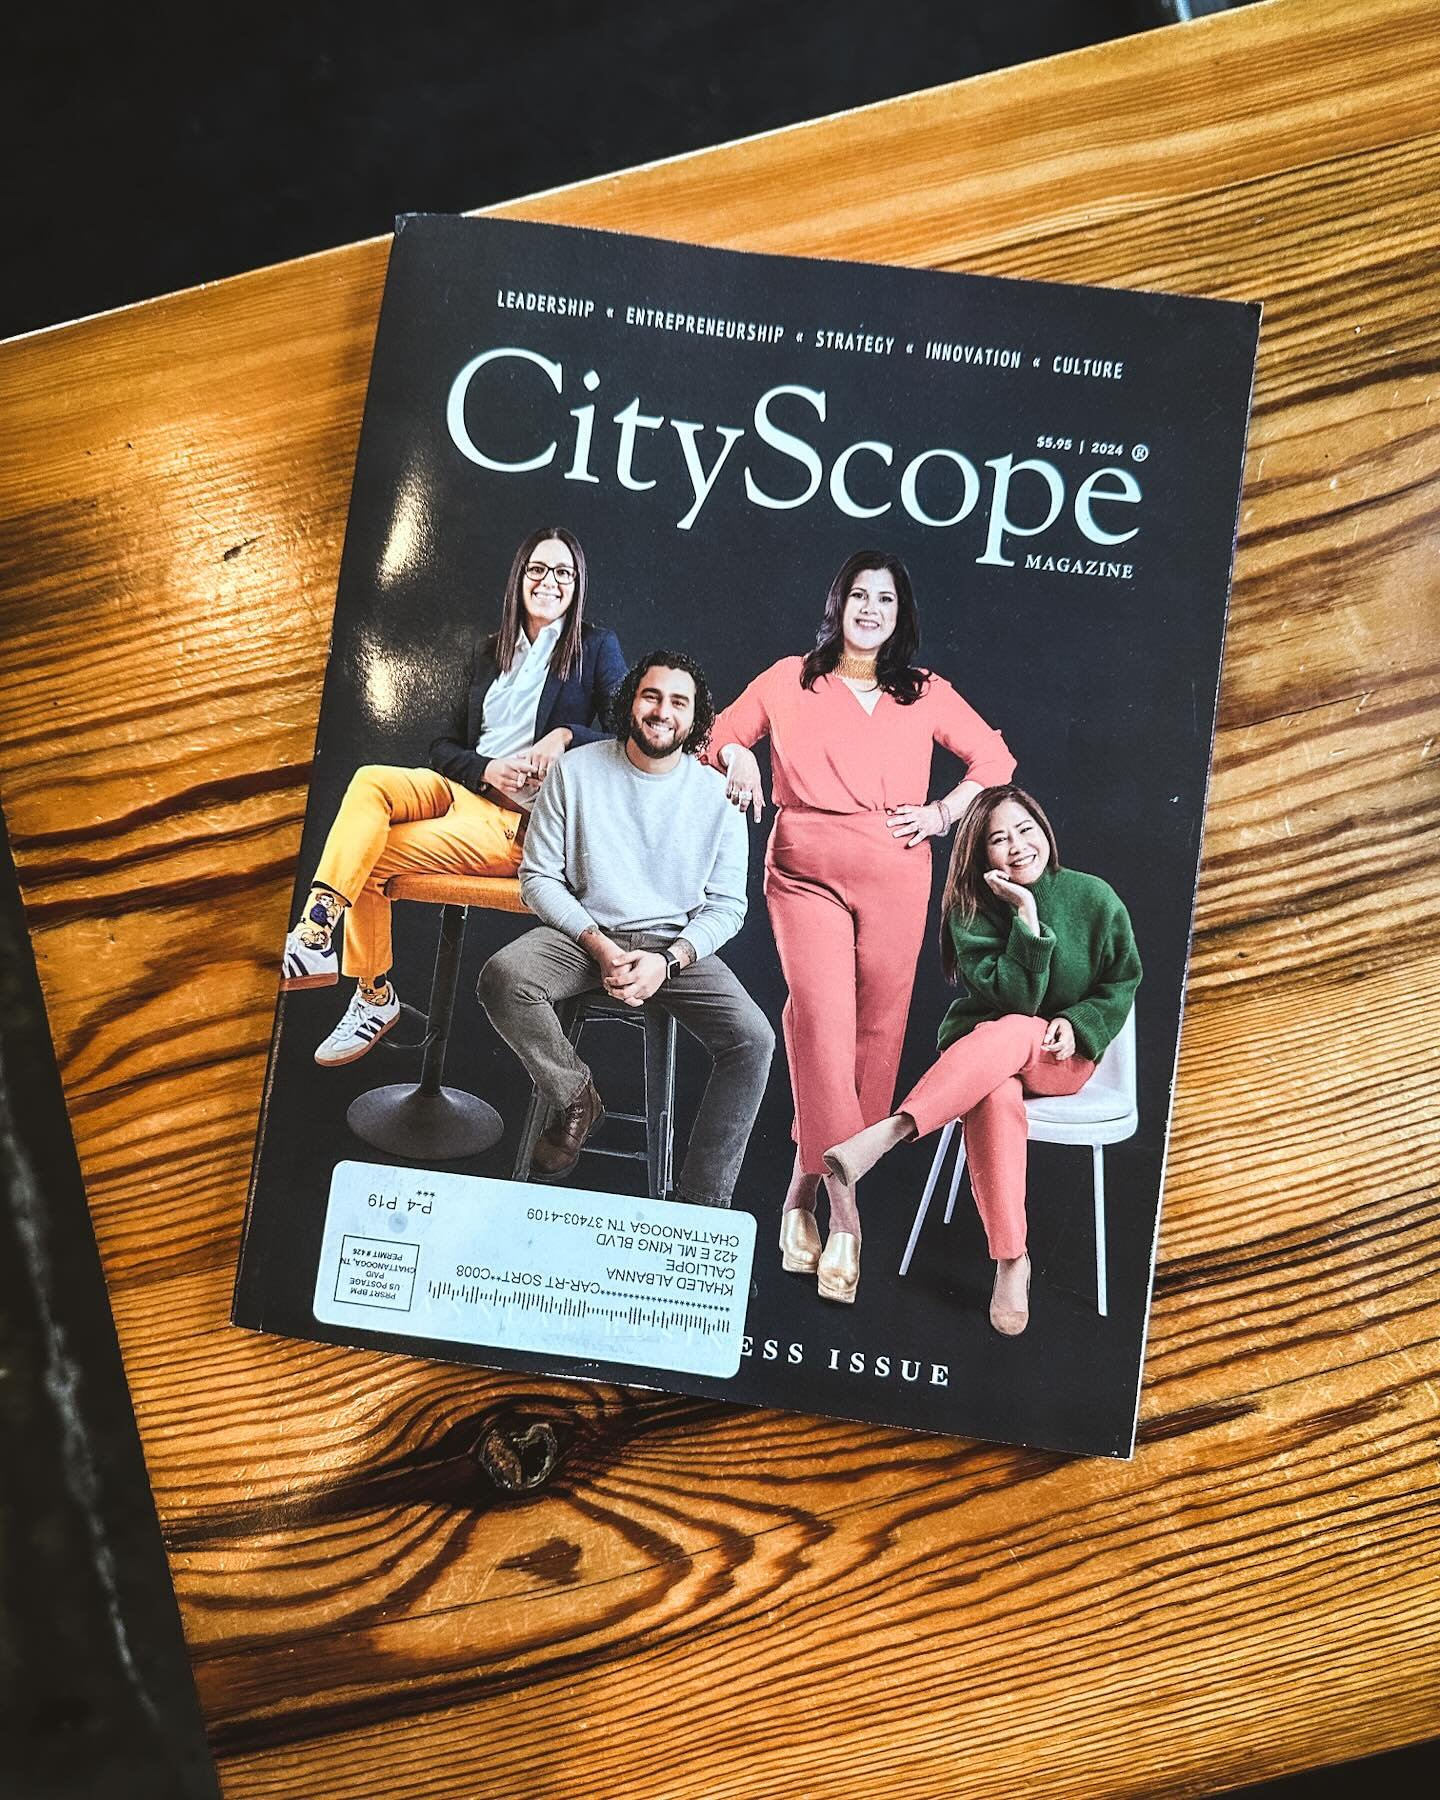 Did you see our chef and co-owner Khaled on the latest cover of @cityscopemagazine? 

He was featured among other amazing business owners in the community who immigrated to the U.S. and bootstrapped their businesses!

Pick up a copy and check it out!